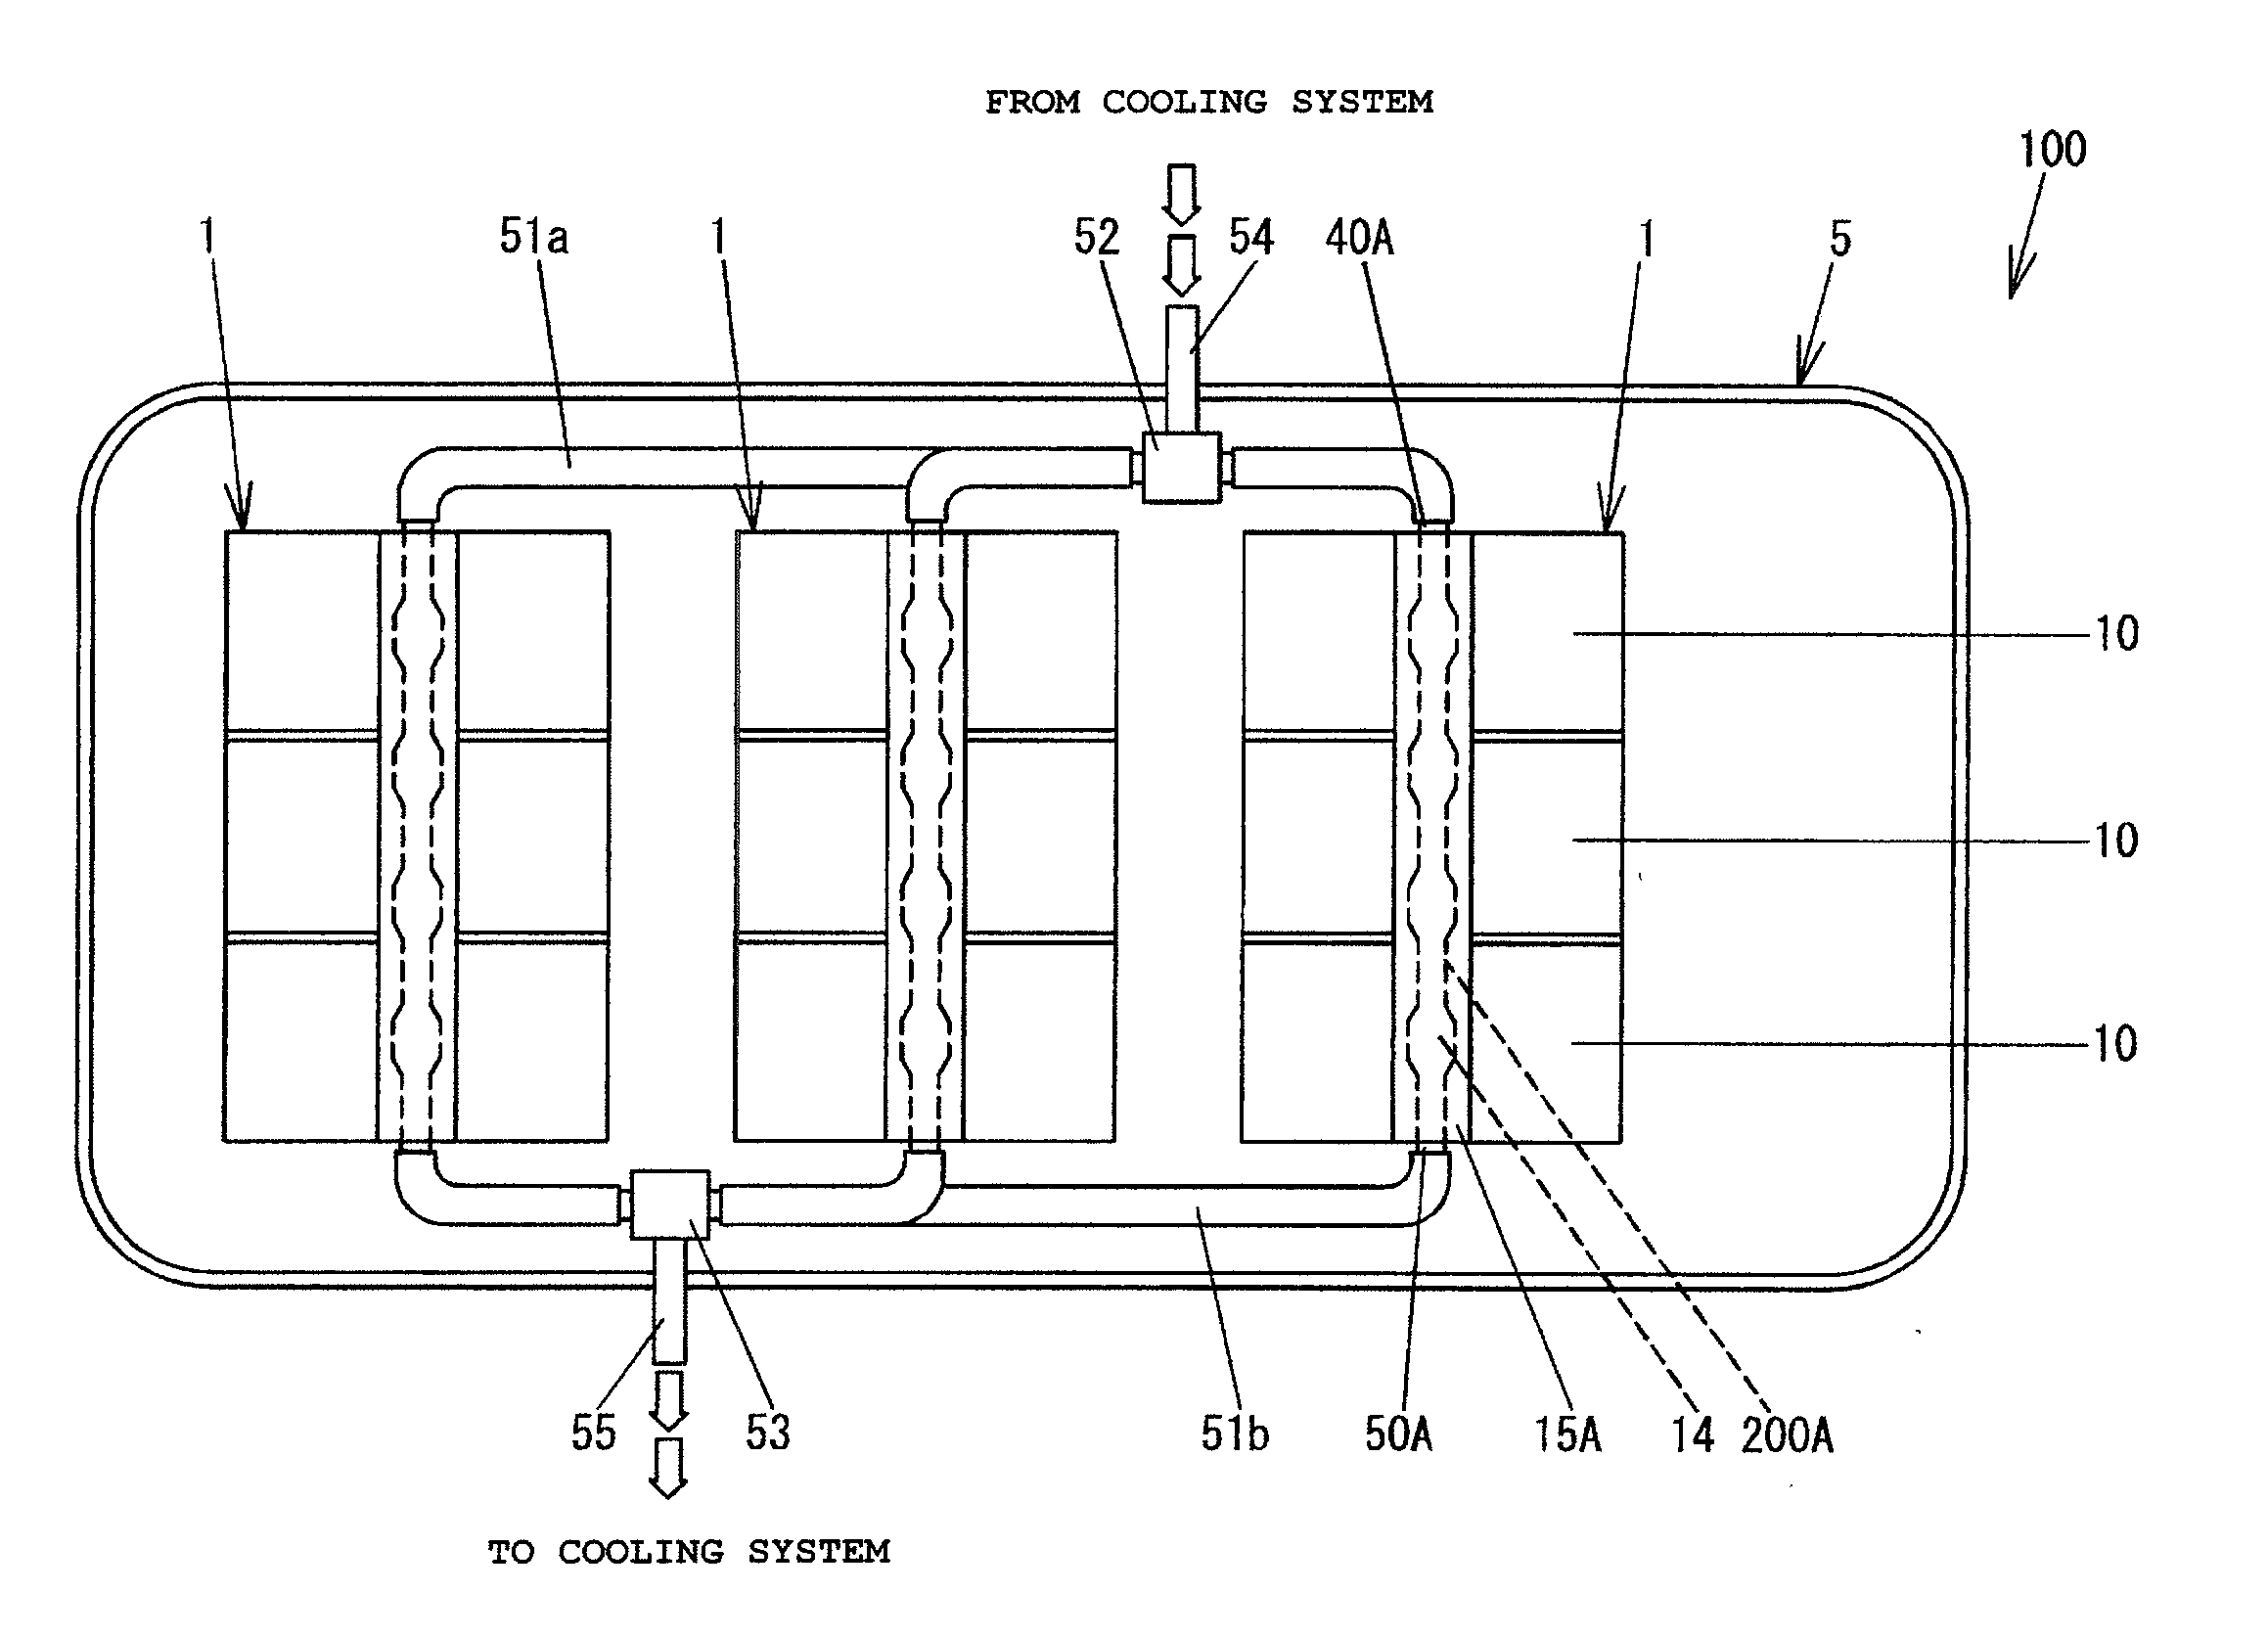 Battery Module and Power Supply Apparatus